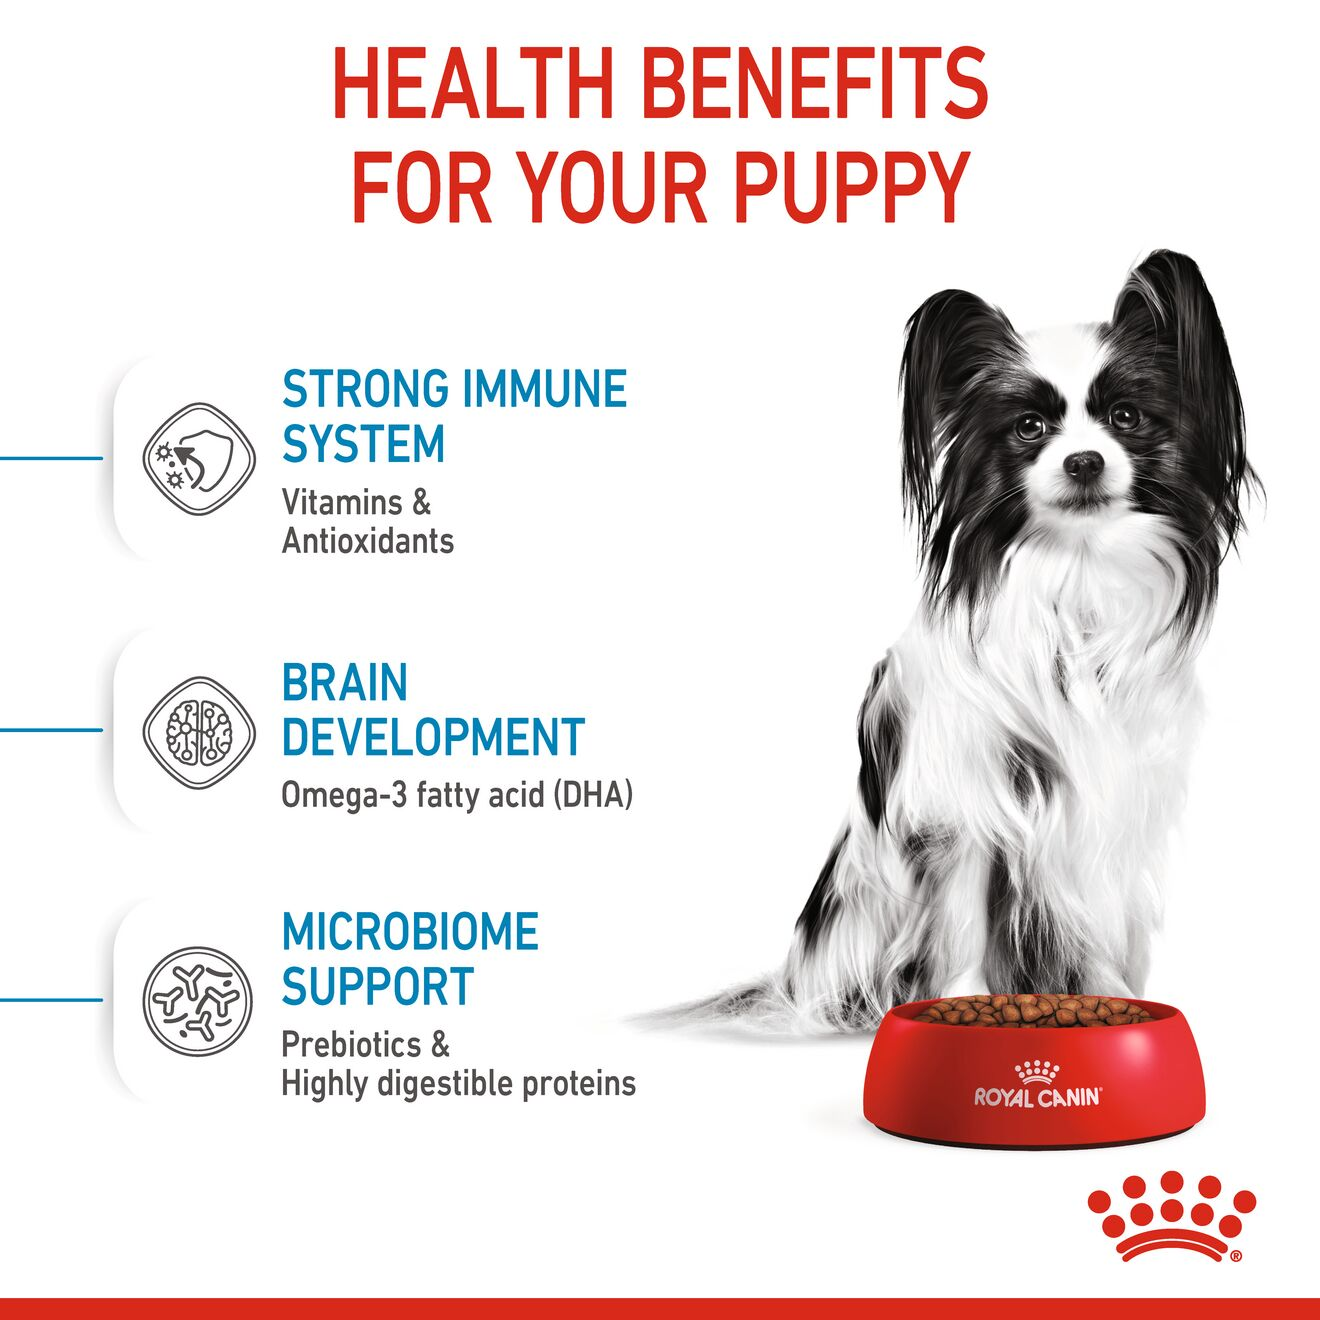 Royal Canin® Size Health Nutrition™ X-Small Puppy Dry Dog Food